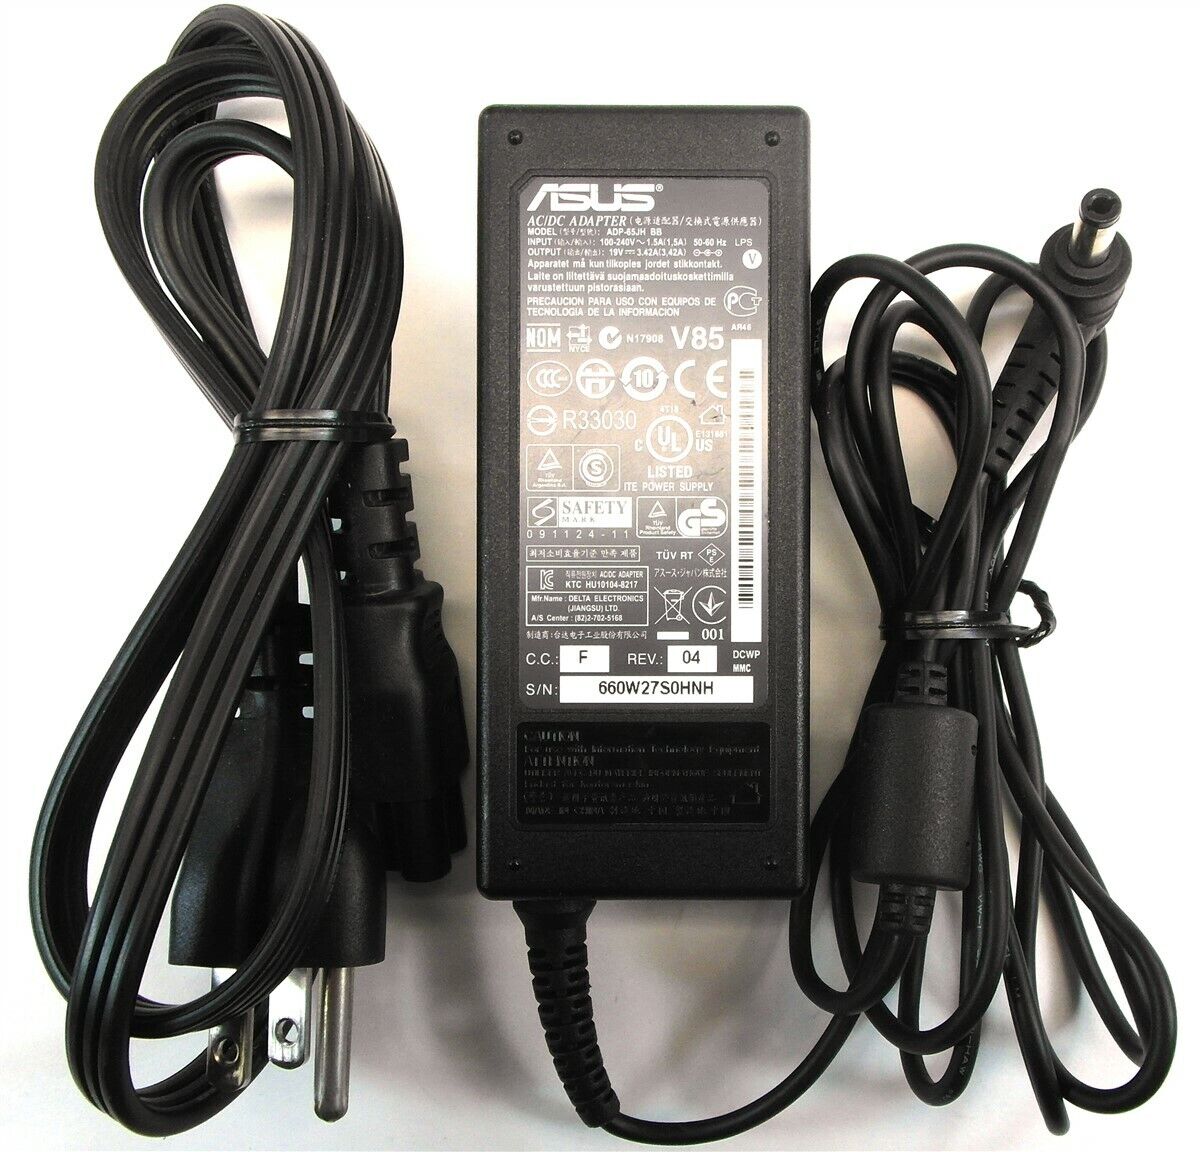 Genuine Asus Laptop Charger AC Adapter Power Supply ADP-65JH BB 19V 3.42A 65W 